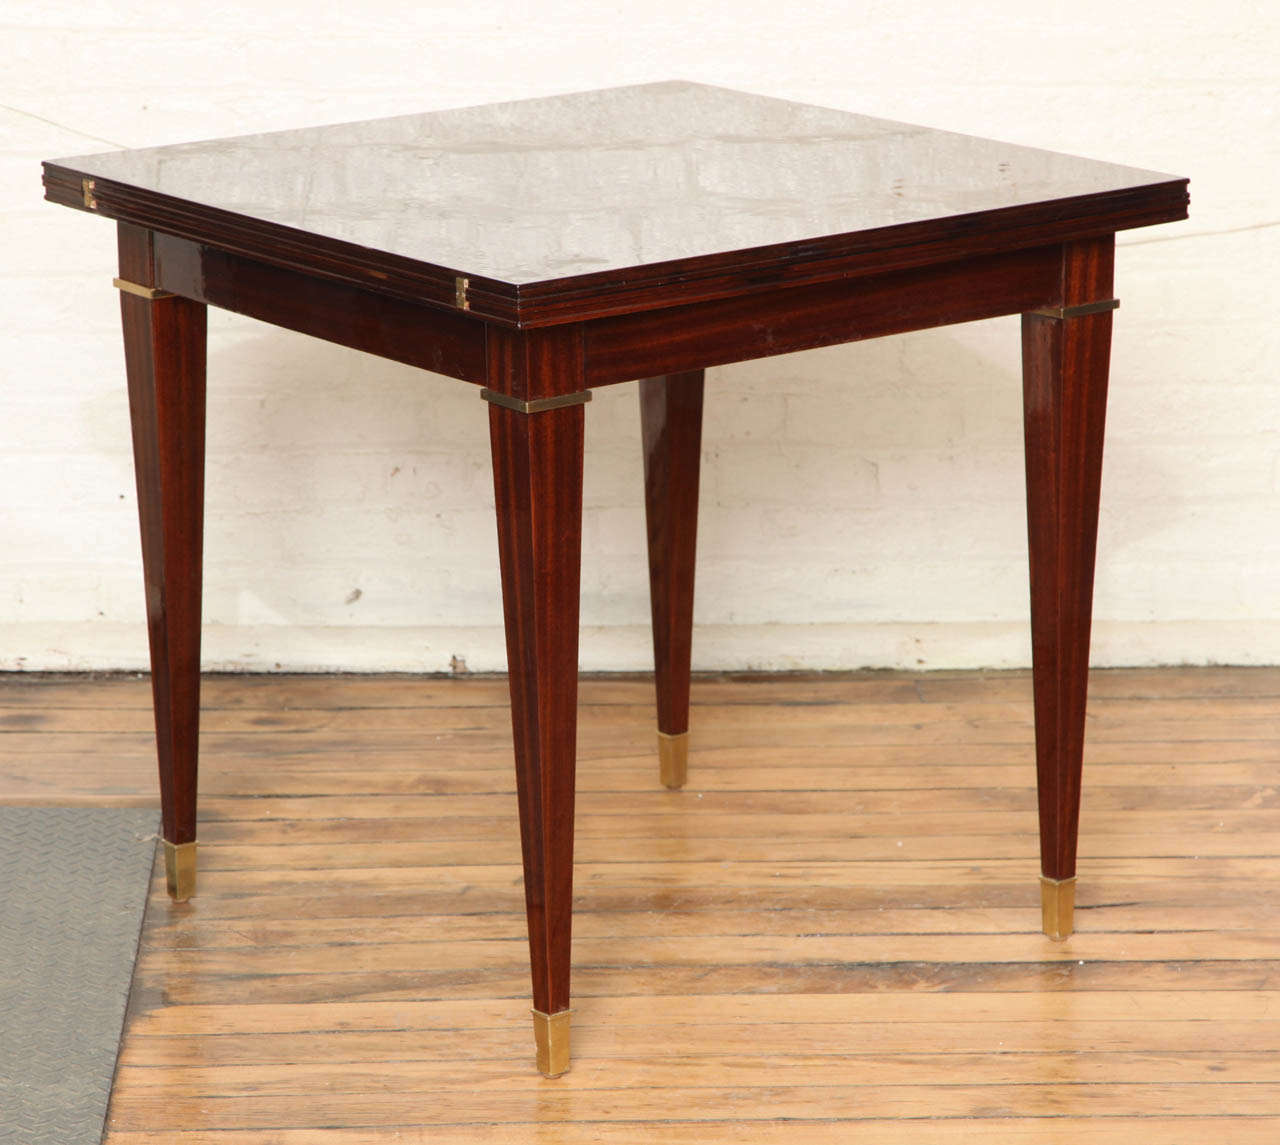 Elegant Art Deco expandable card table. 
When extended serves as a lovely dining table. Walnut and mahogany intarsia with bronze banding and sabots.